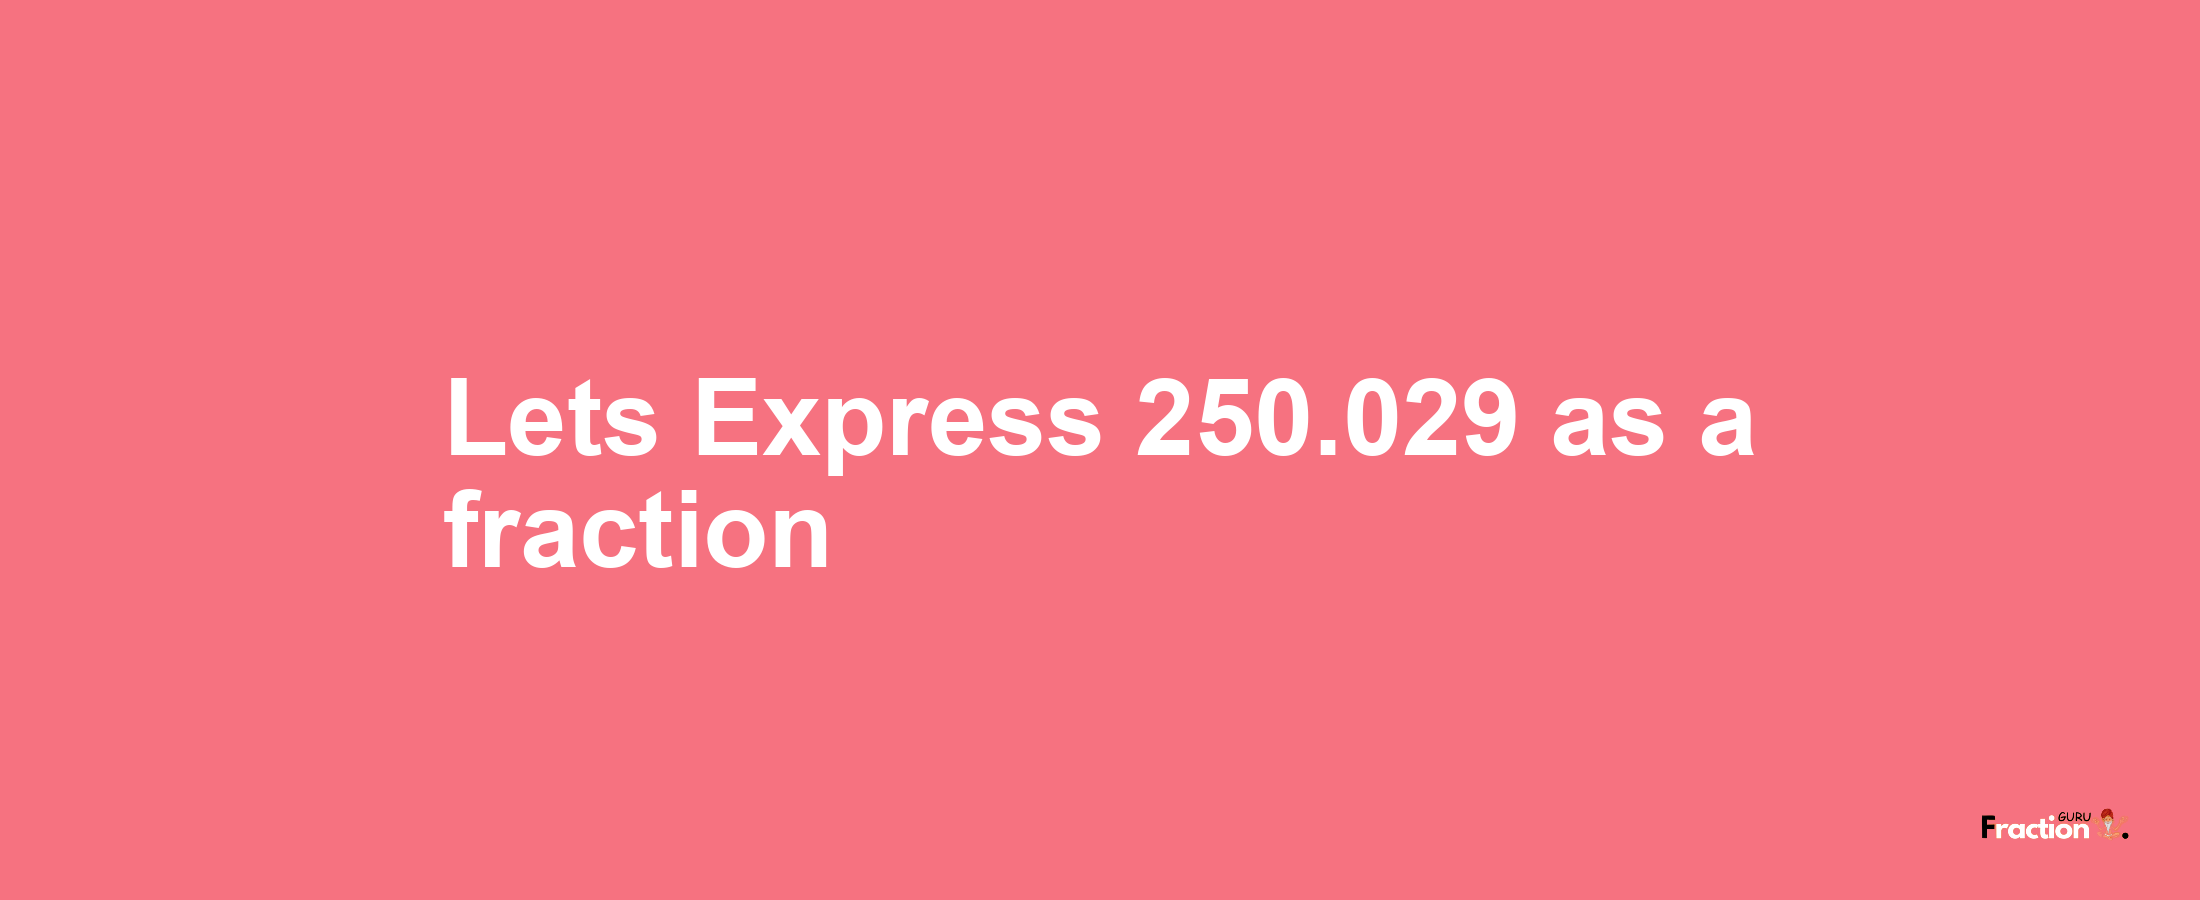 Lets Express 250.029 as afraction